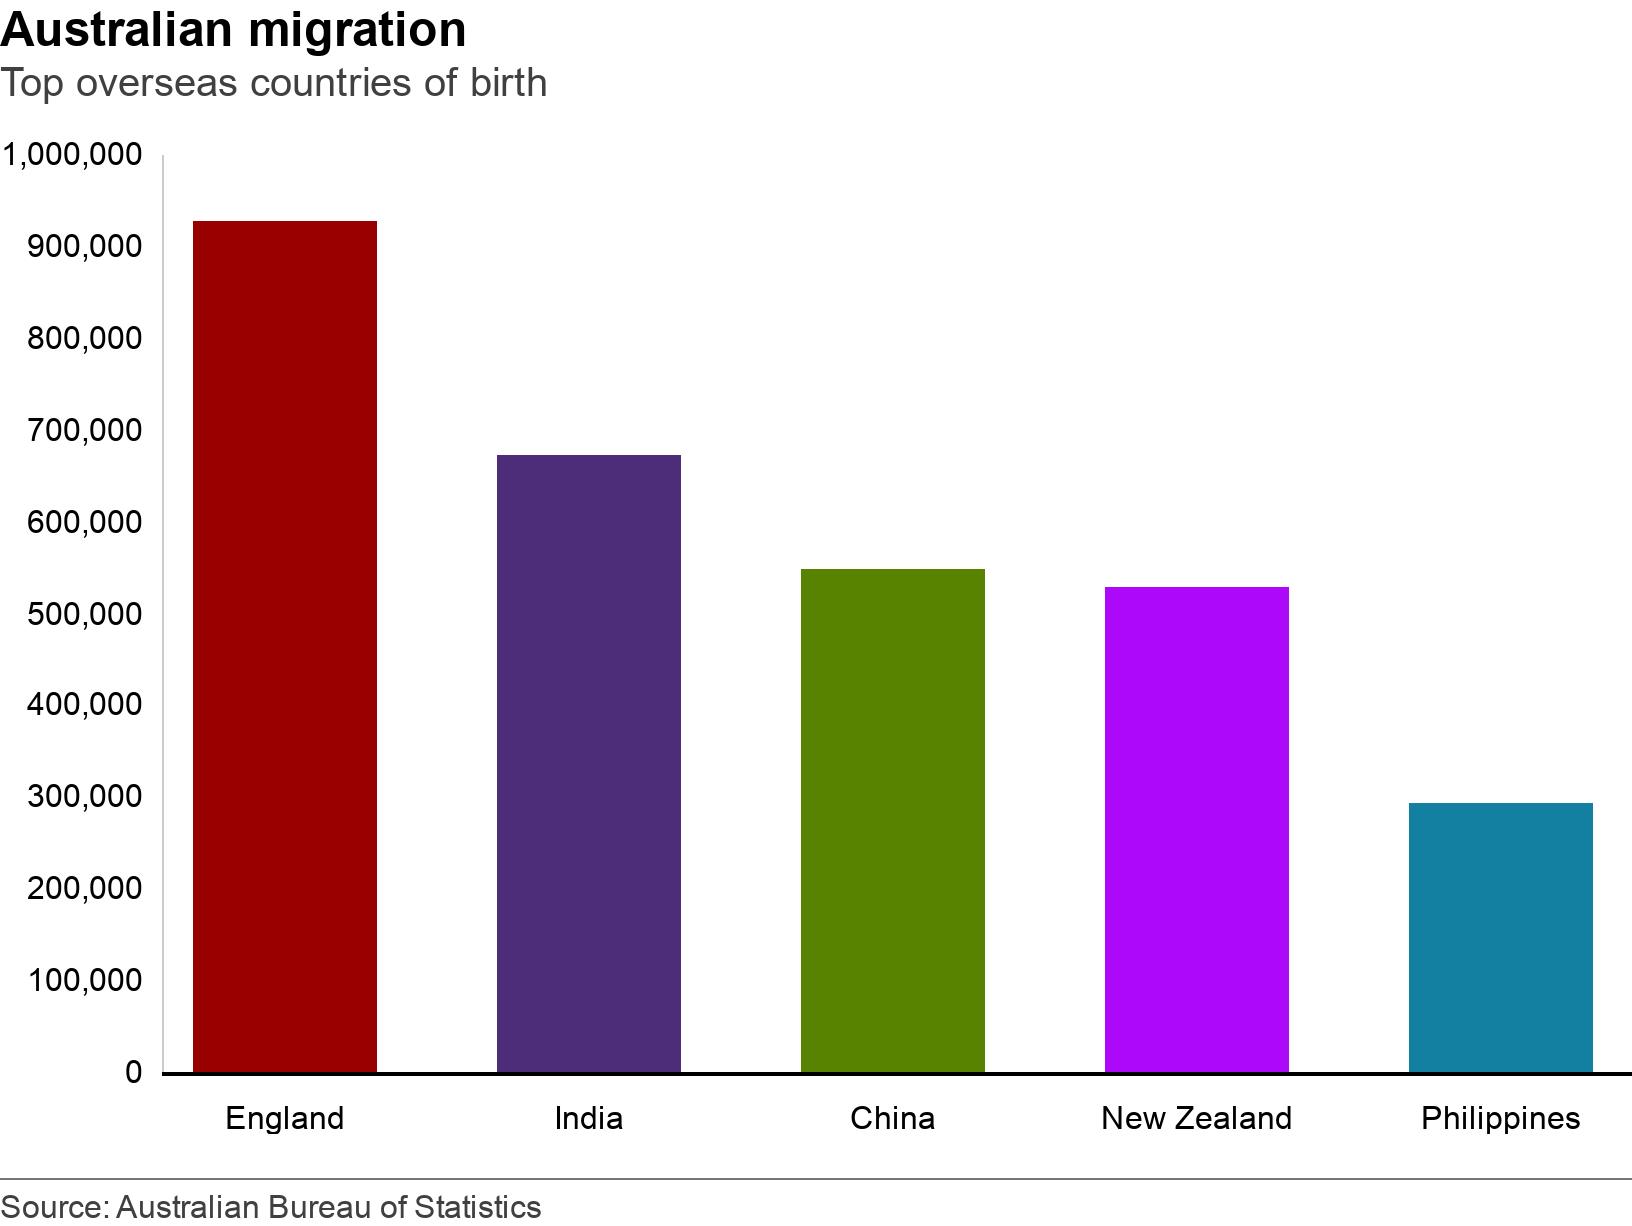 Australian migration. Top overseas countries of birth. The data shows the top five overseas countries of birth for residents of Australia .